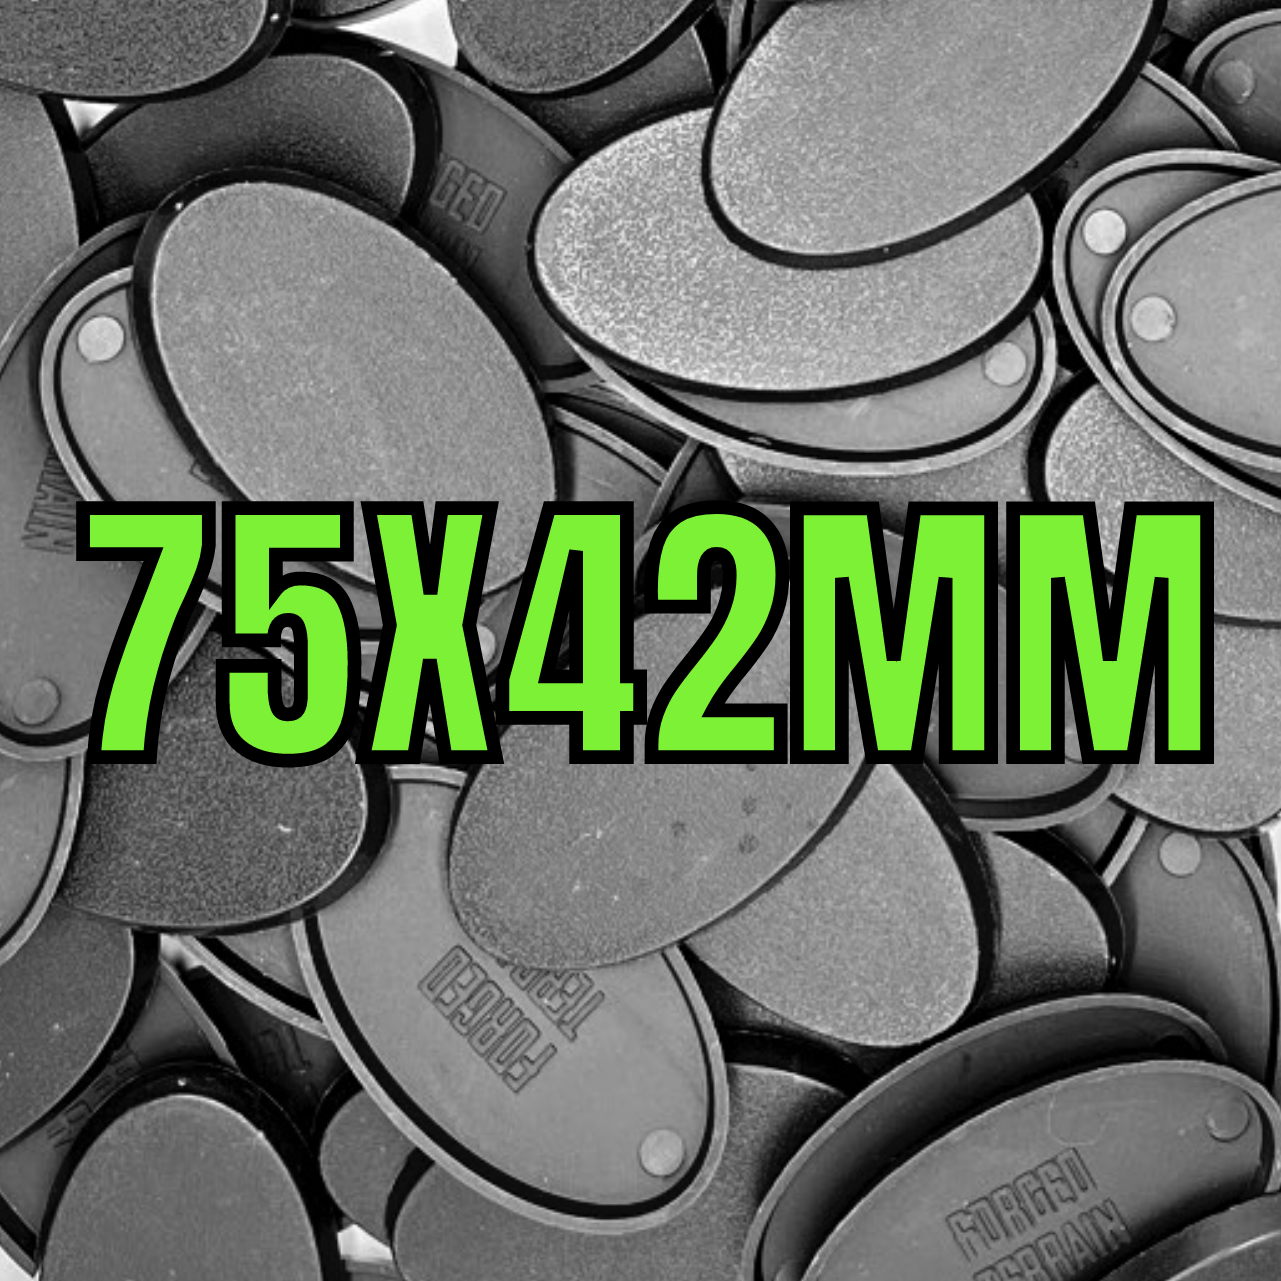 75x42mm Oval Base for tabletop wargaming